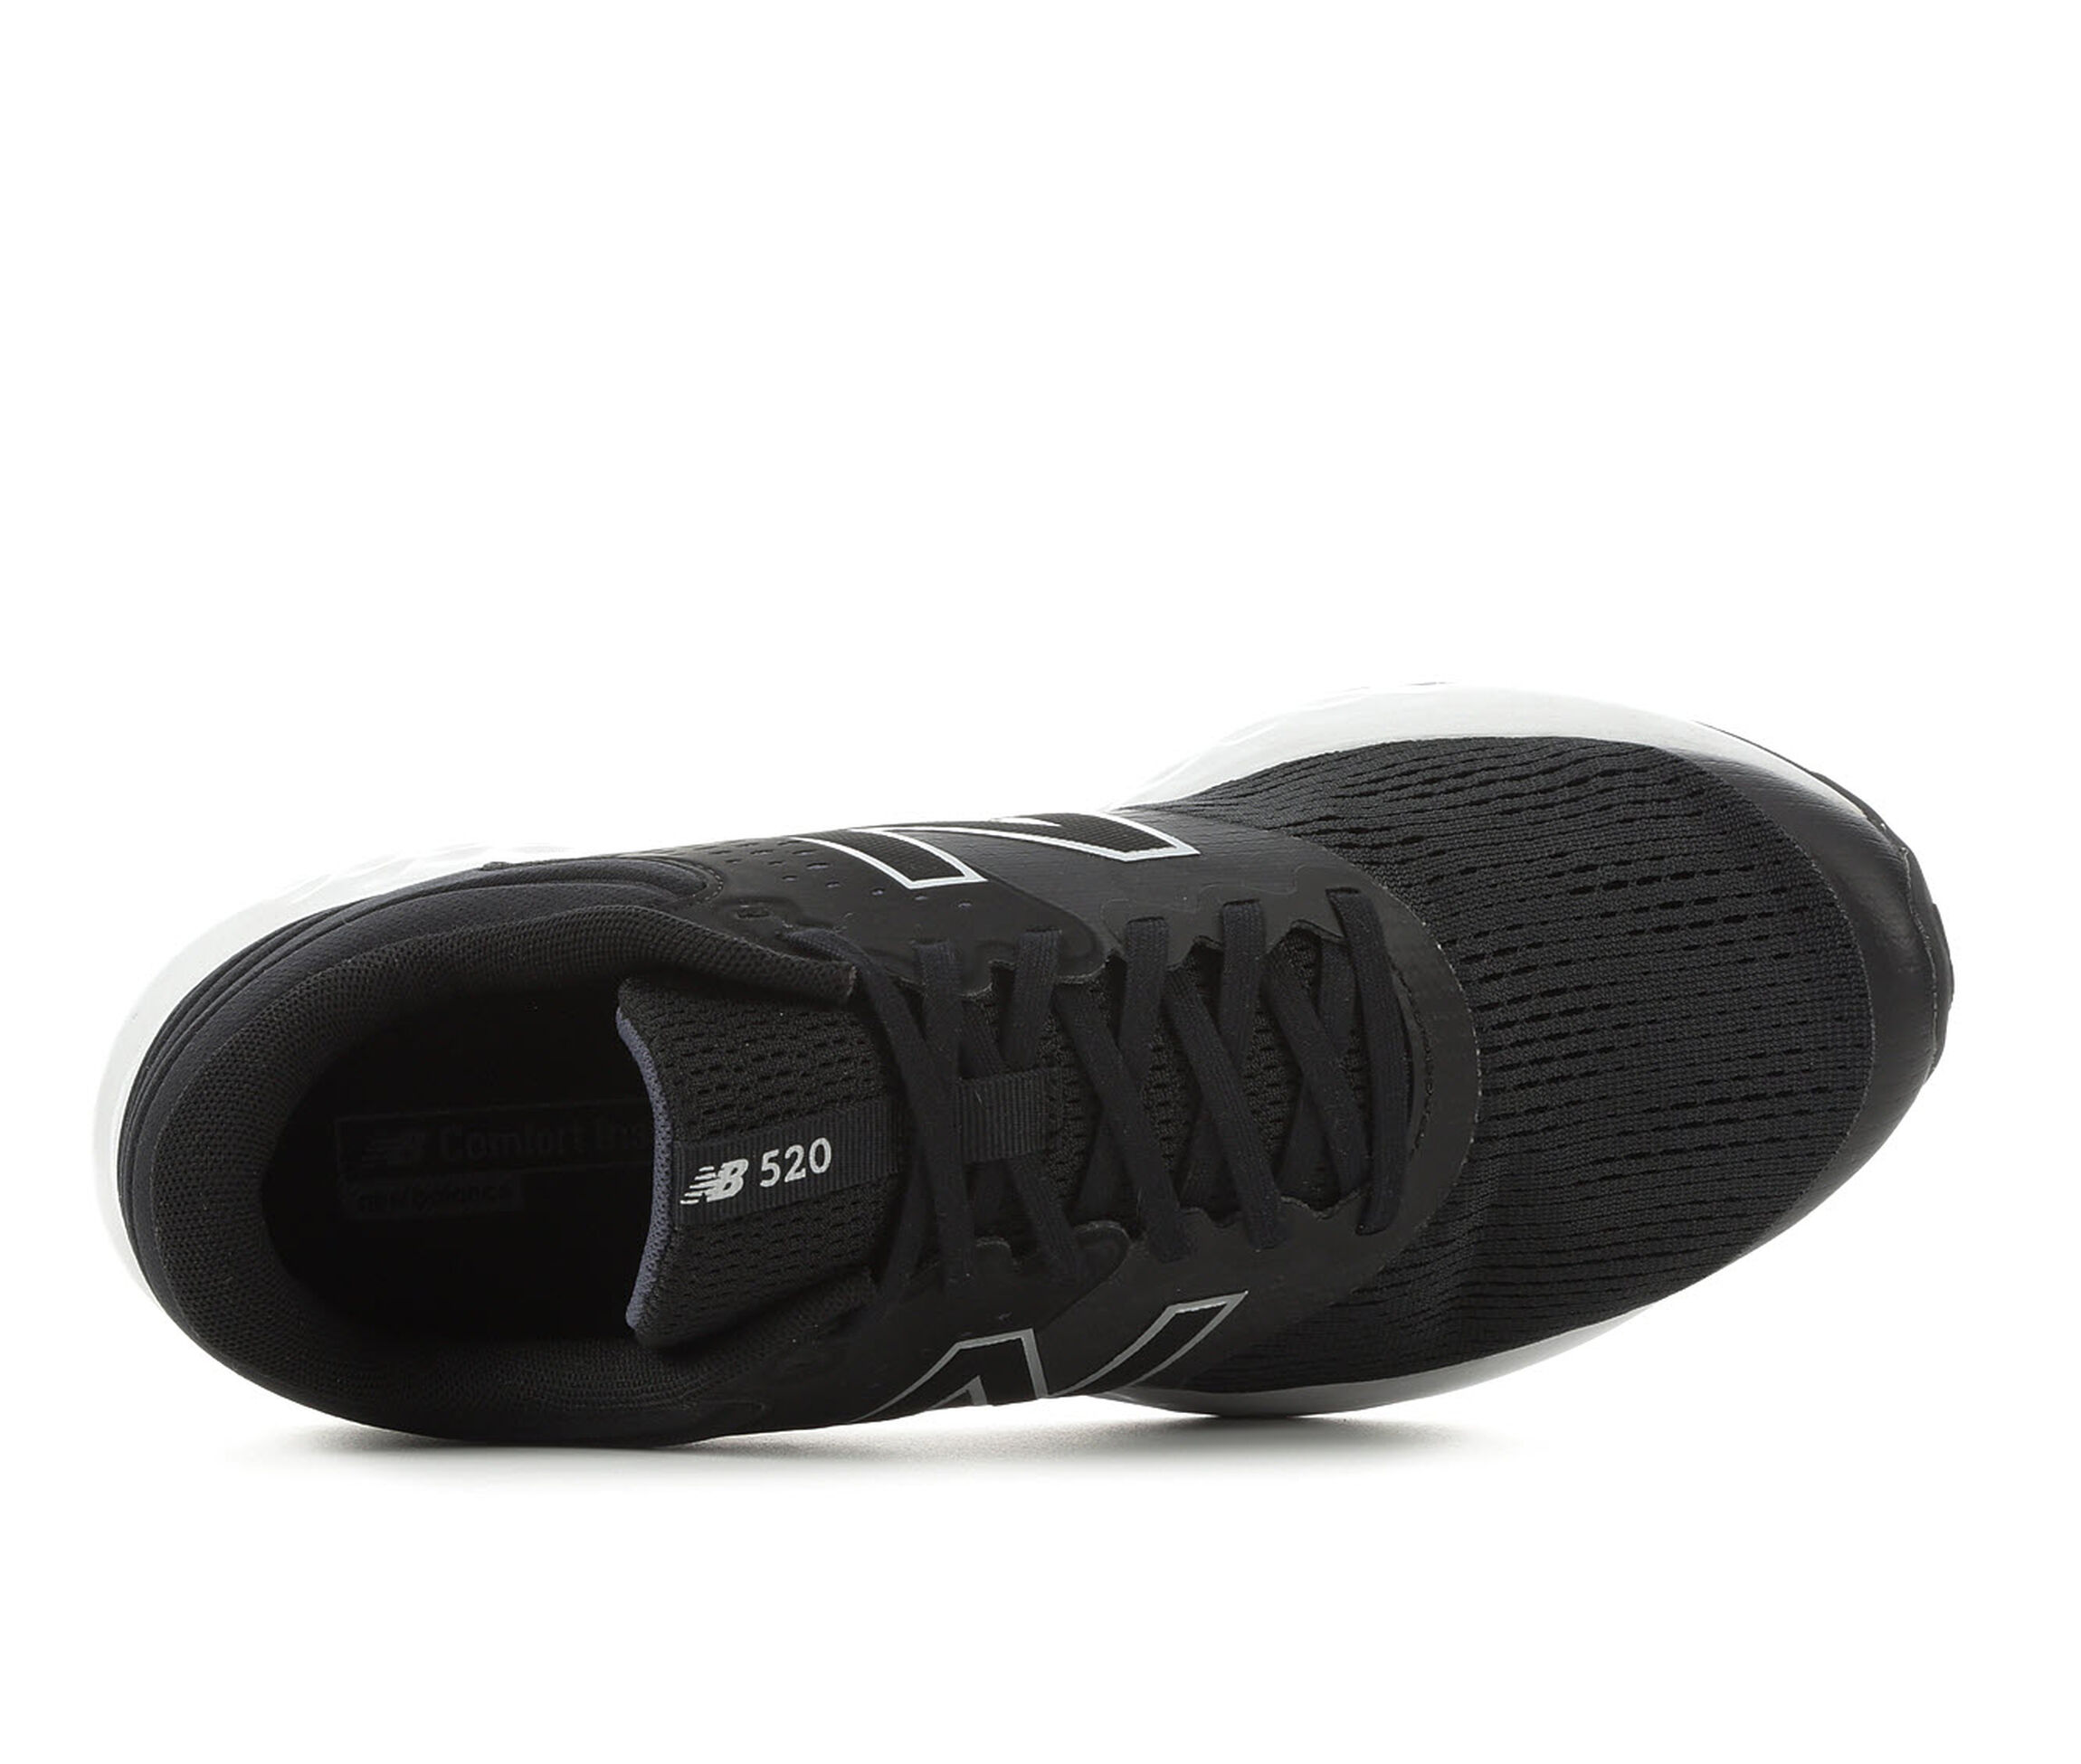 New Balance Shoes & Accessories | Shoe Carnival